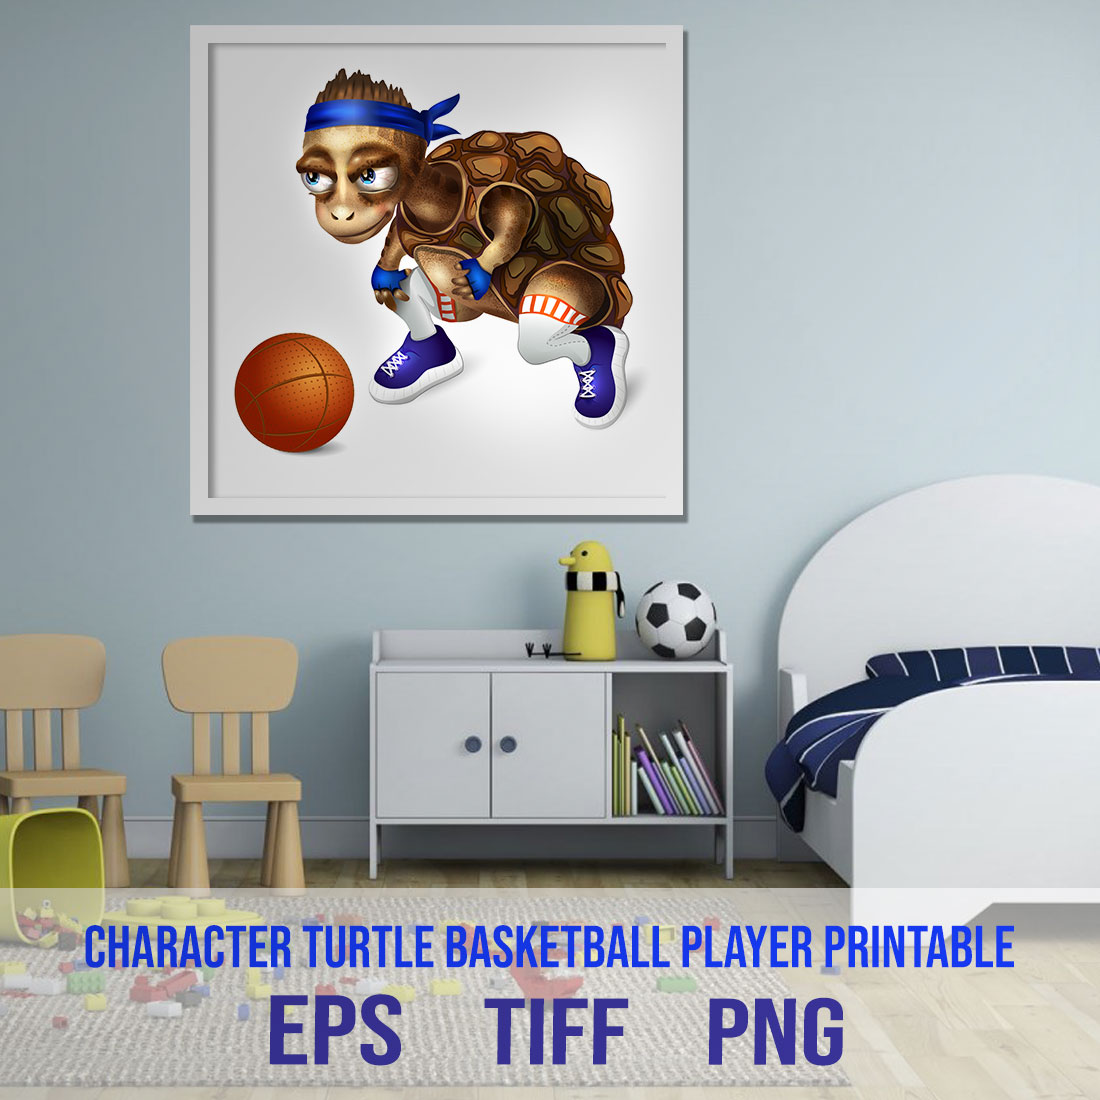 Funny Character Turtle Basketball Player previews.